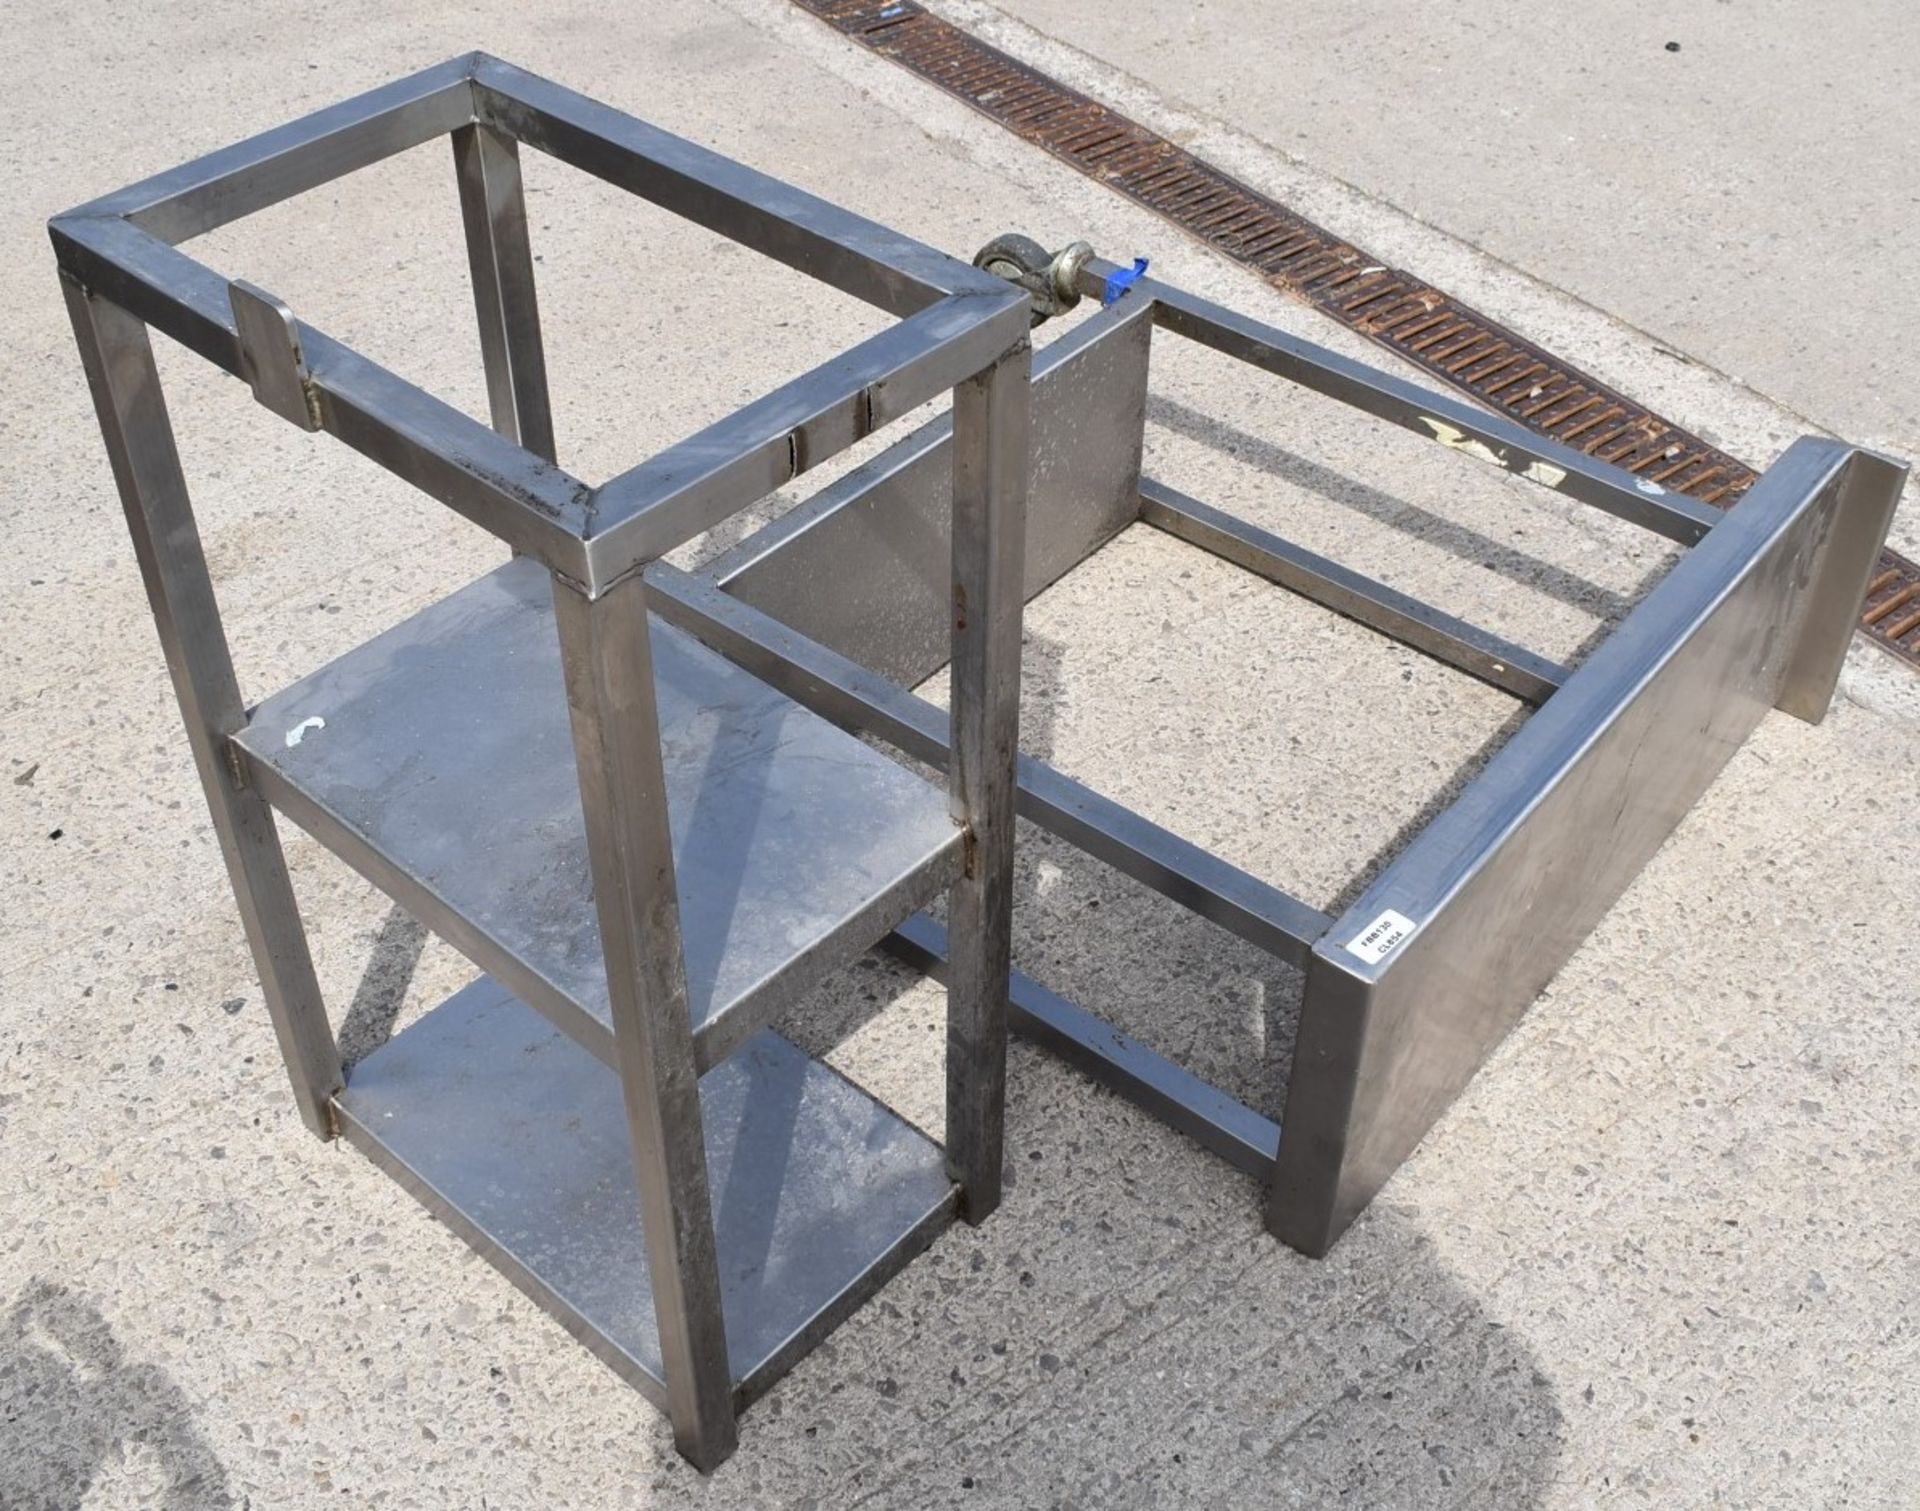 1 x Stainless Steel Inlet Prep Table With Castors and 1 x Stainless Steel Shelf Unit - Image 2 of 3